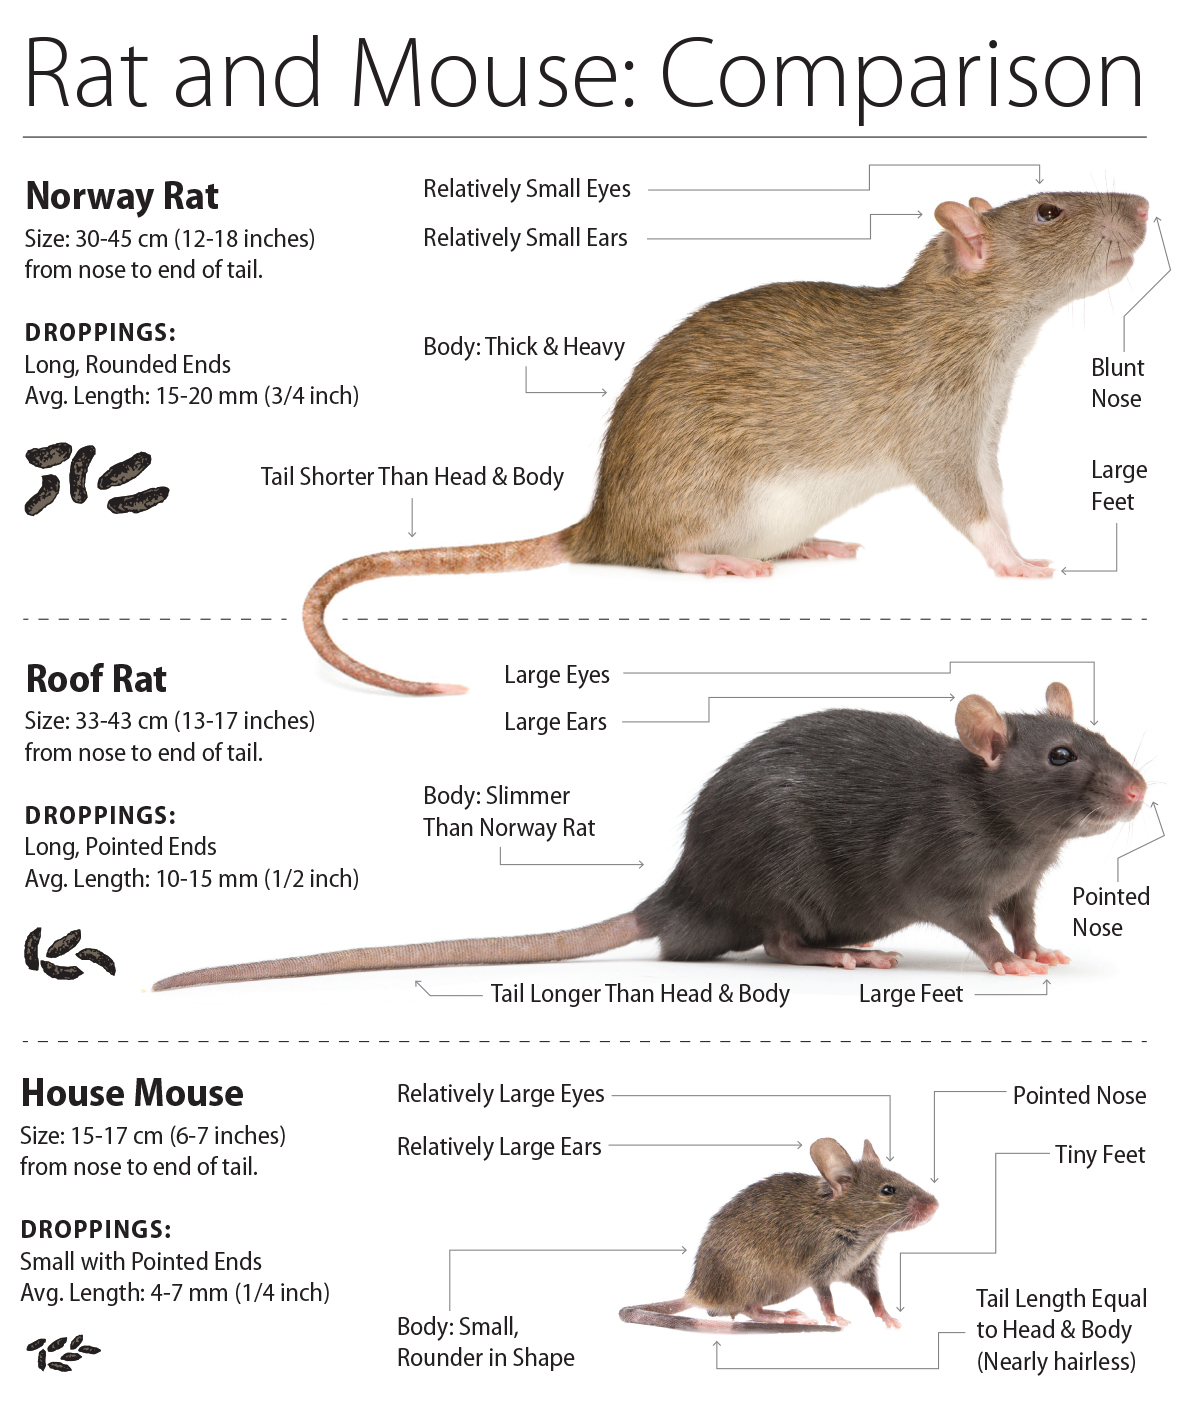 Managing rat and mouse pests